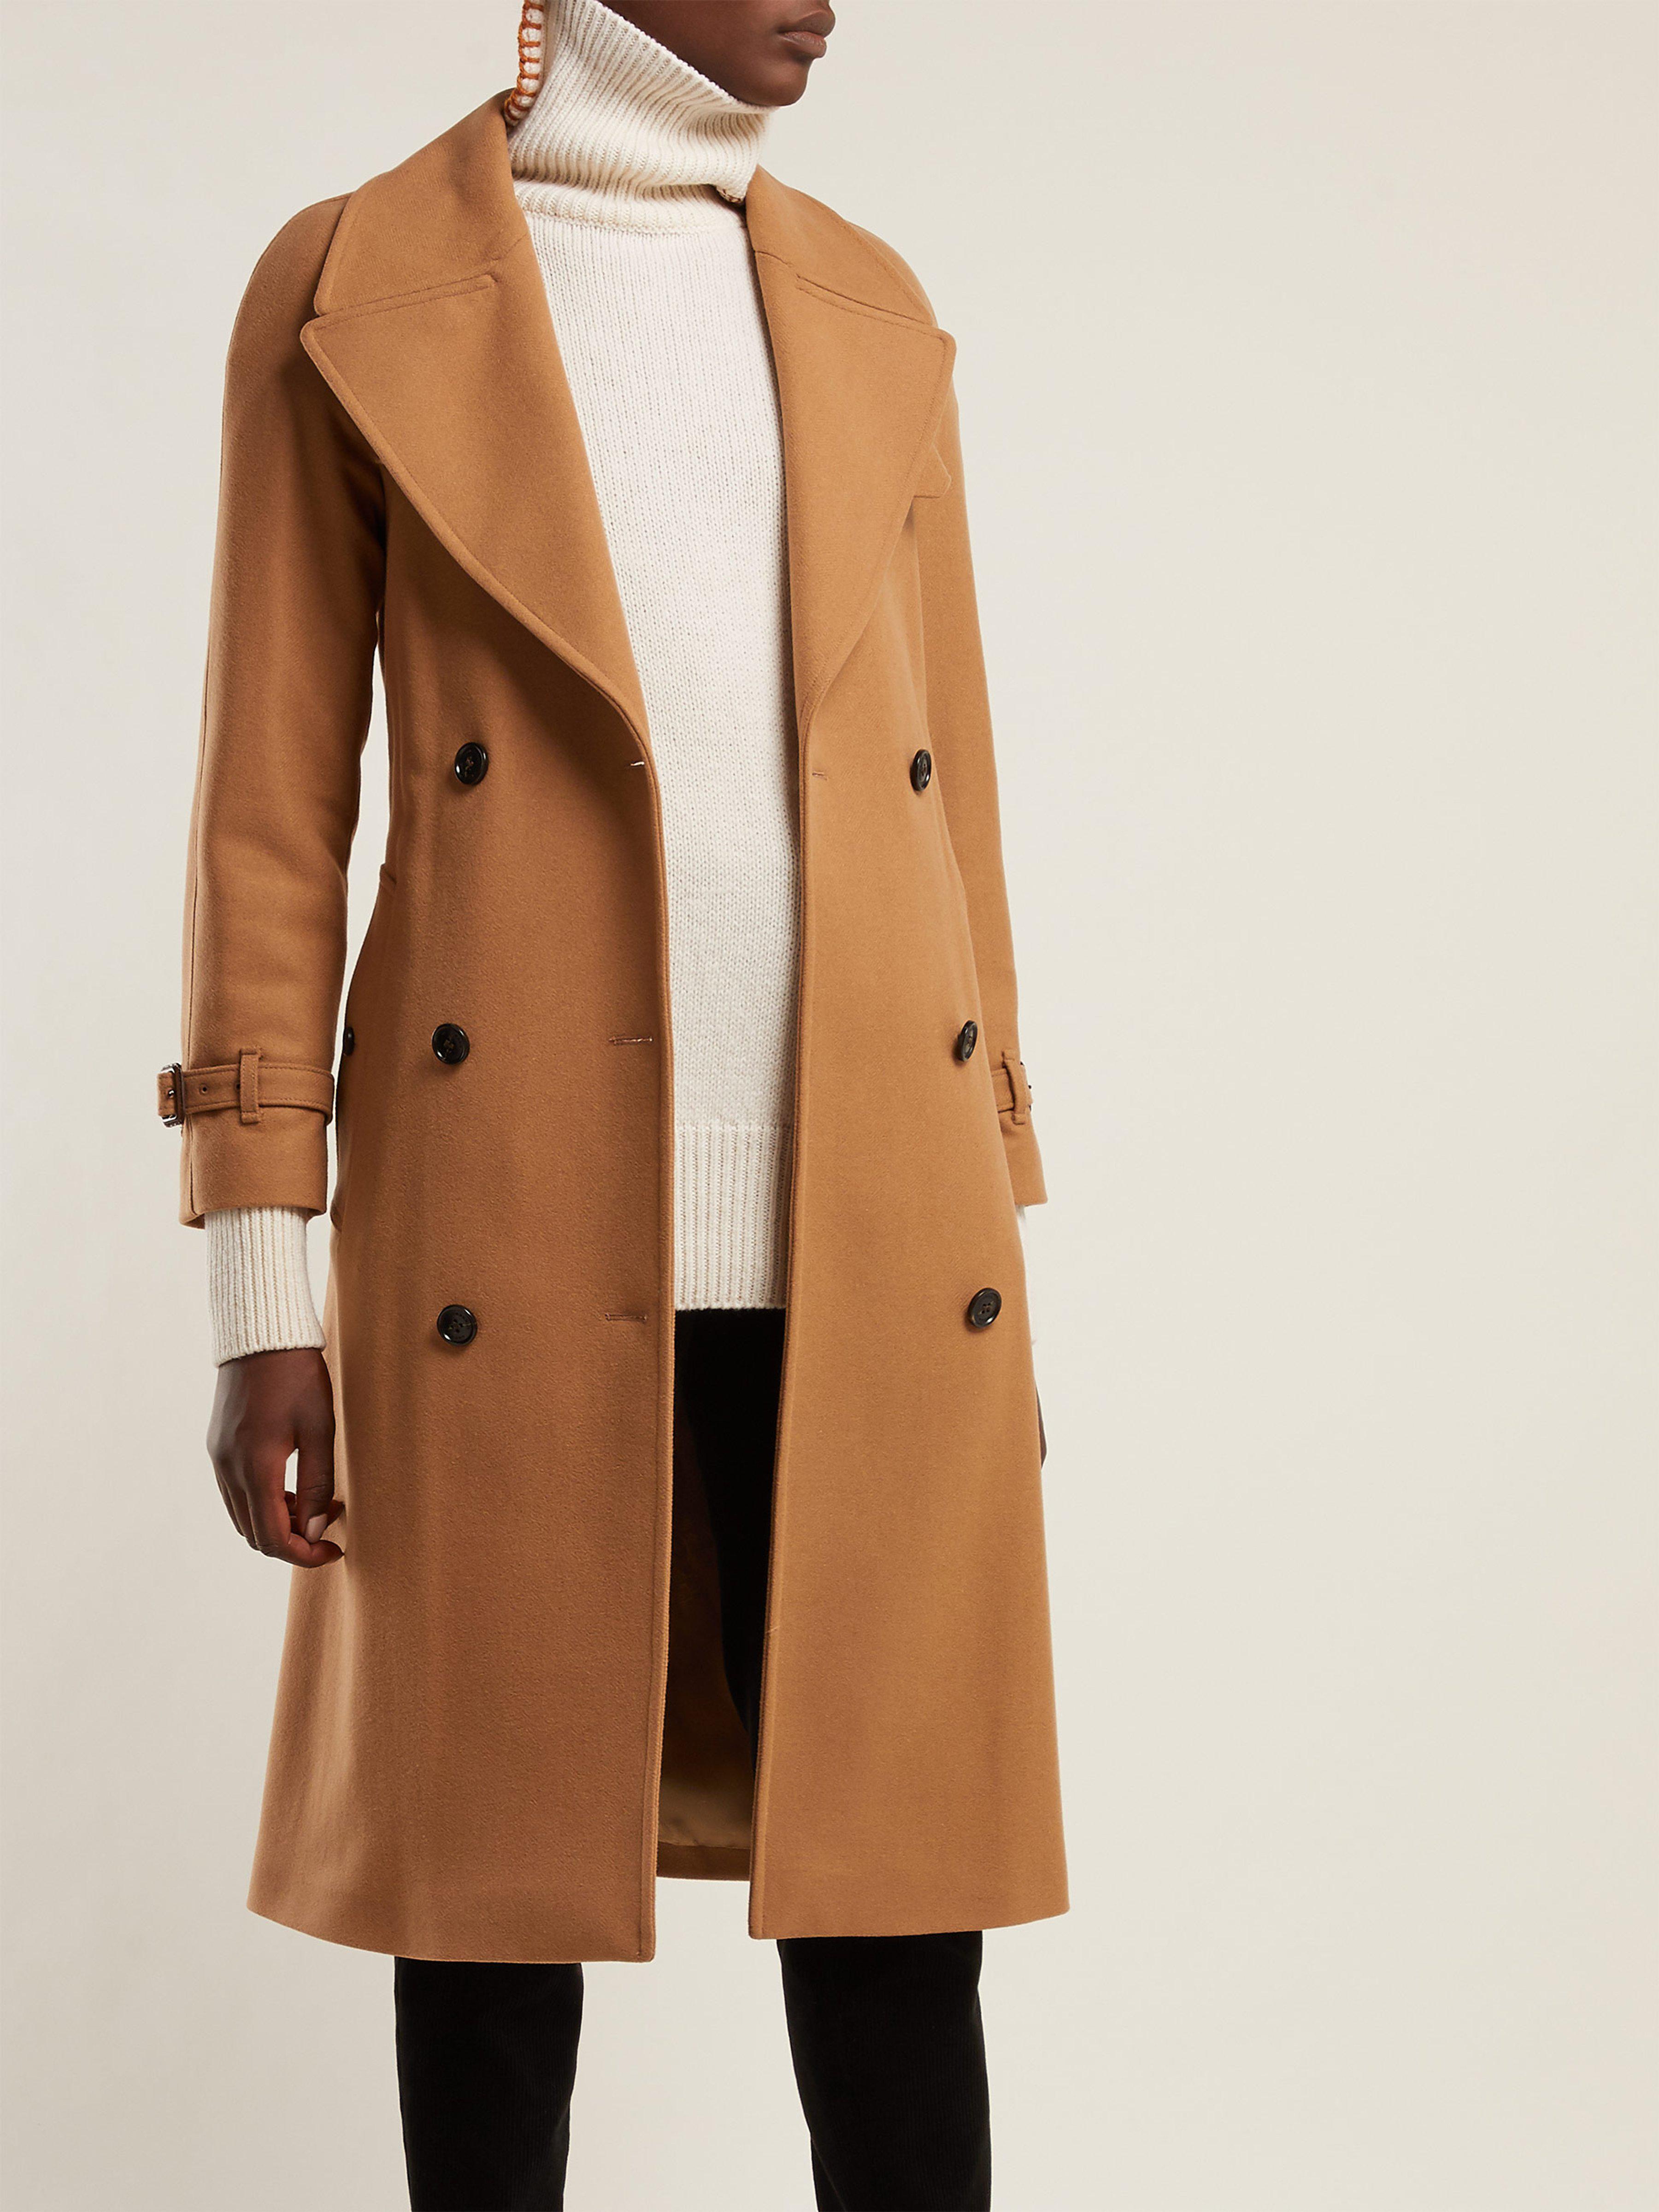 Burberry Cranston Wool-blend Trench Coat in Beige (Natural) - Lyst